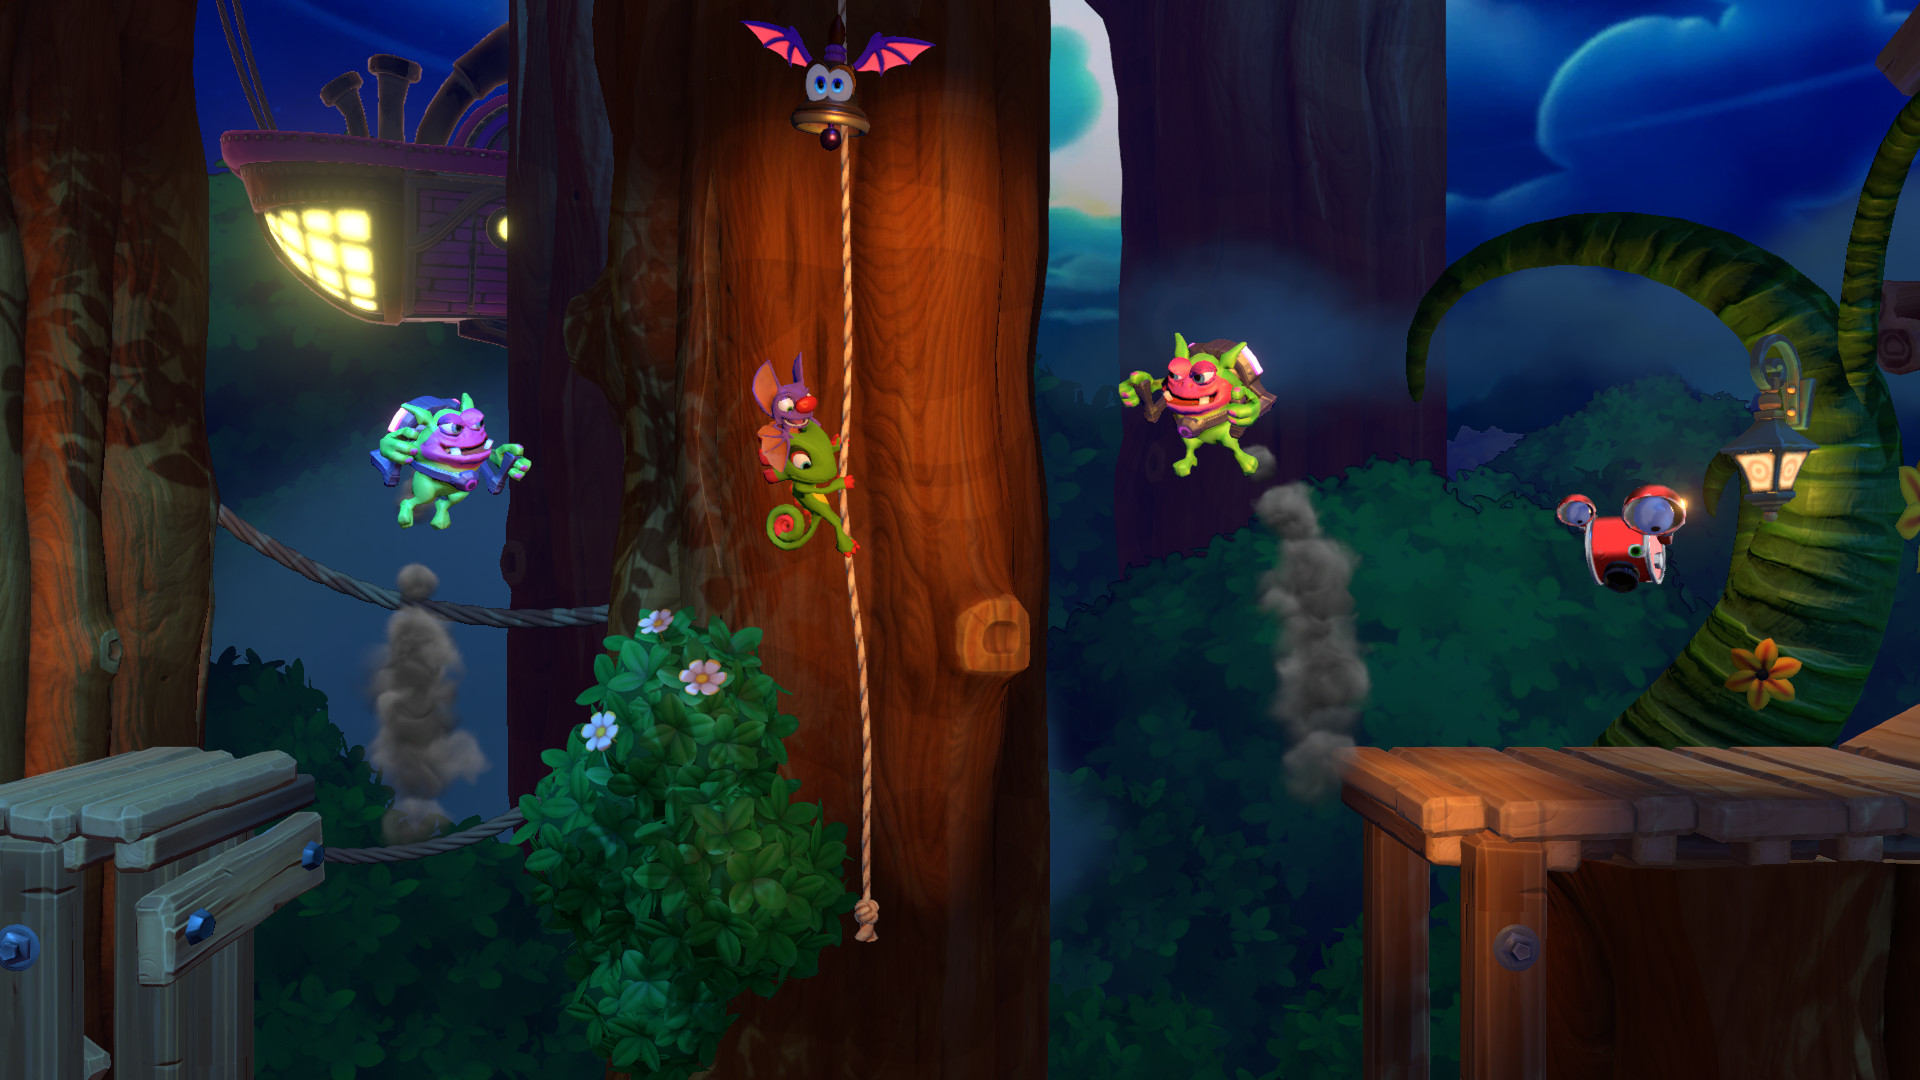 A night scene with Yooka on a rope.